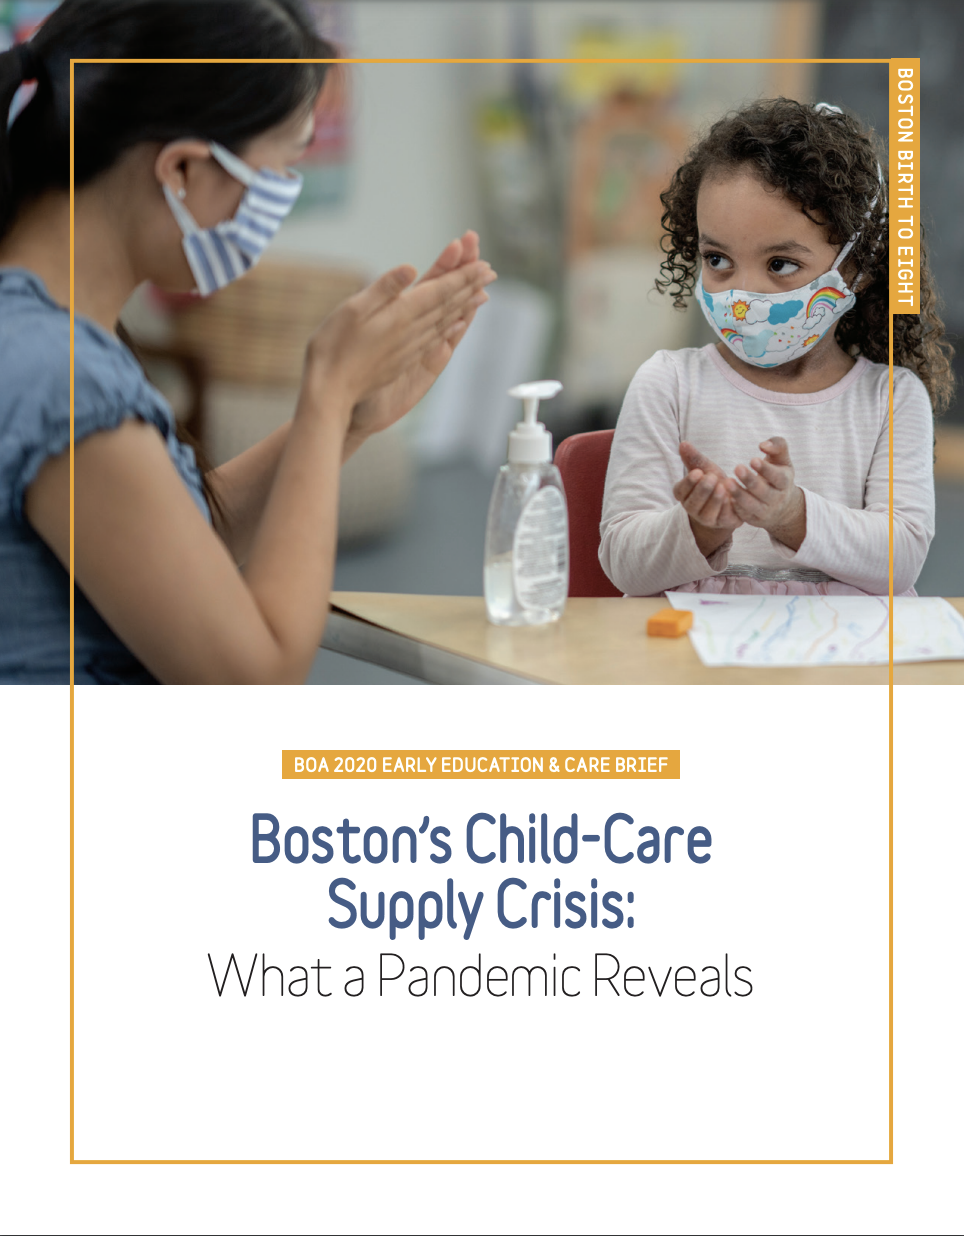 Boston"s Childcare Supply Crisis report cover. Top half of image: A woman and child sit at t able wearing cloth face masks and rubbing hand sanitizer into their hands. A bottle of hand sanitizer is between them on the table. Bottom half of image: Over a white background, white text in a horizontal rectangle says "BOA 2020 Early Education & Care Brief." Larger blue text below that says "Boston's Child-Care Supply Crisis" and slightly smaller black text below that says "What a Pandemic Reveals". A thin gold rectanglular outline traces the outer borders of the report cover. A gold vertical rectangle is attached to it at the top right corner; white text inside of it says "Boston Birth to Eight".